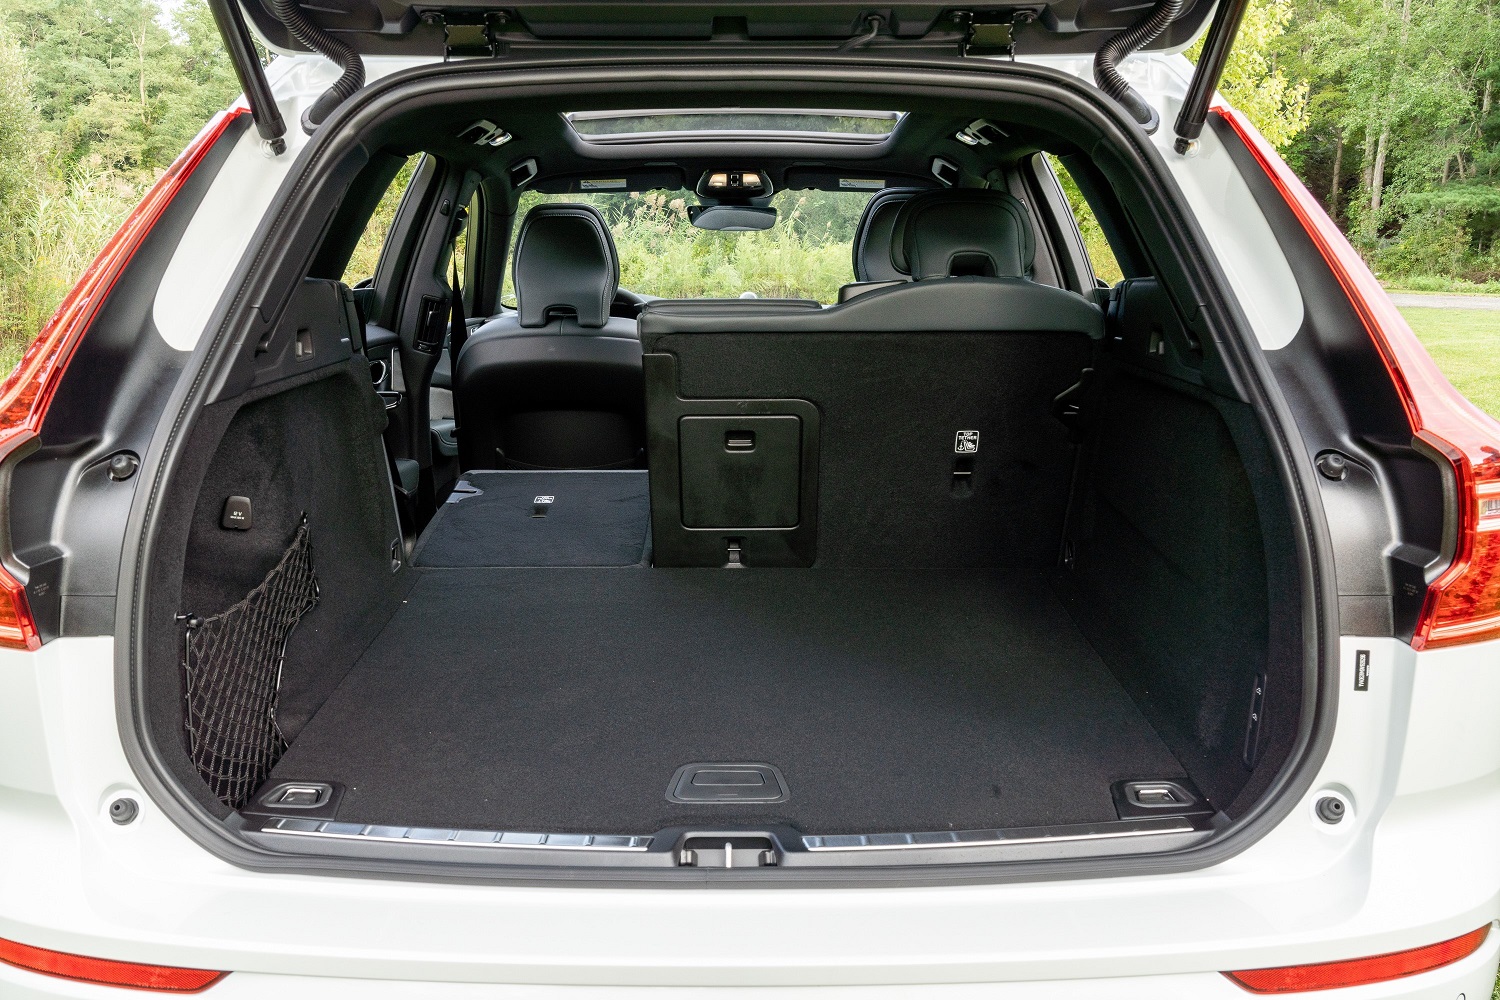 A seats folded view of the cargo area